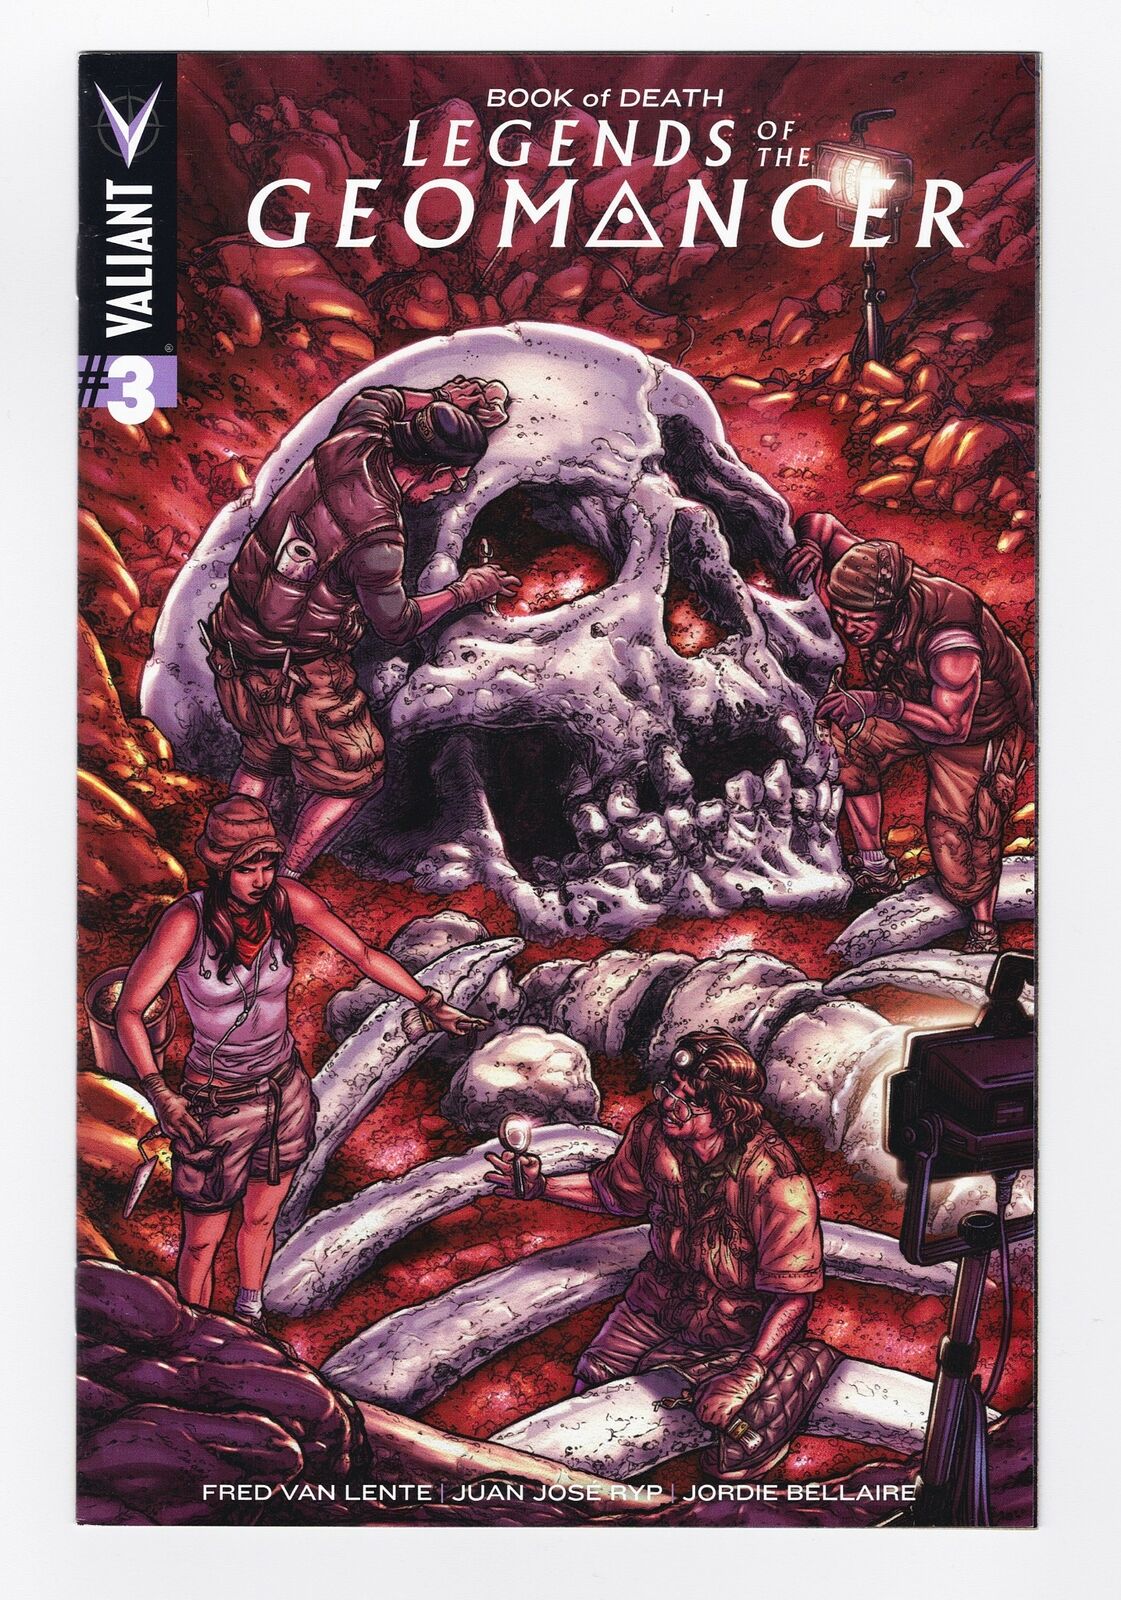 BOOK OF DEATH: LEGENDS OF THE GEOMANCER #3 LIMITED 1:10 VARIANT VALIANT 2015 VEI